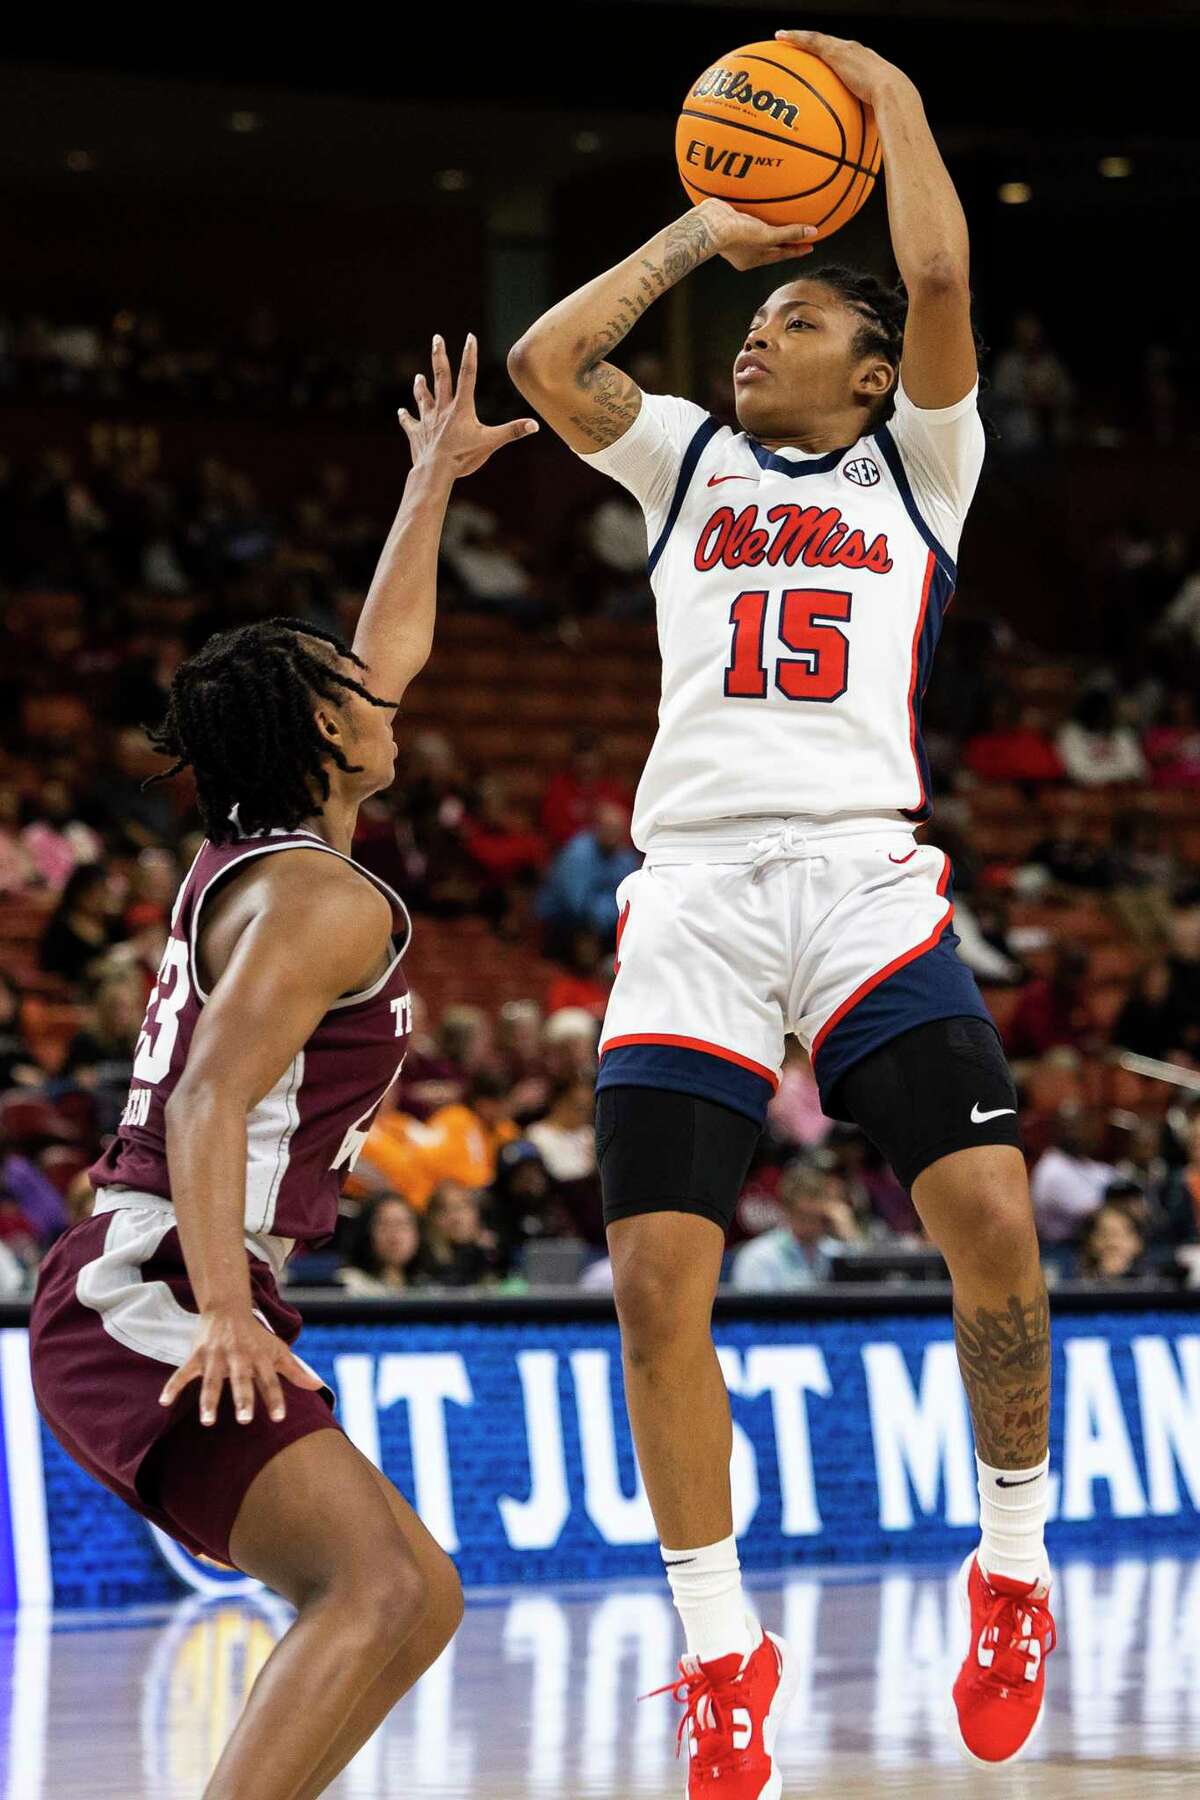 Mississippi's Angel Baker (15) goes up for a shot against Texas A&M's McKinzie Green (23) in the first half of an NCAA college basketball game during the Southeastern Conference women's tournament in Greenville, S.C., Friday, March 3, 2023. (AP Photo/Mic Smith)